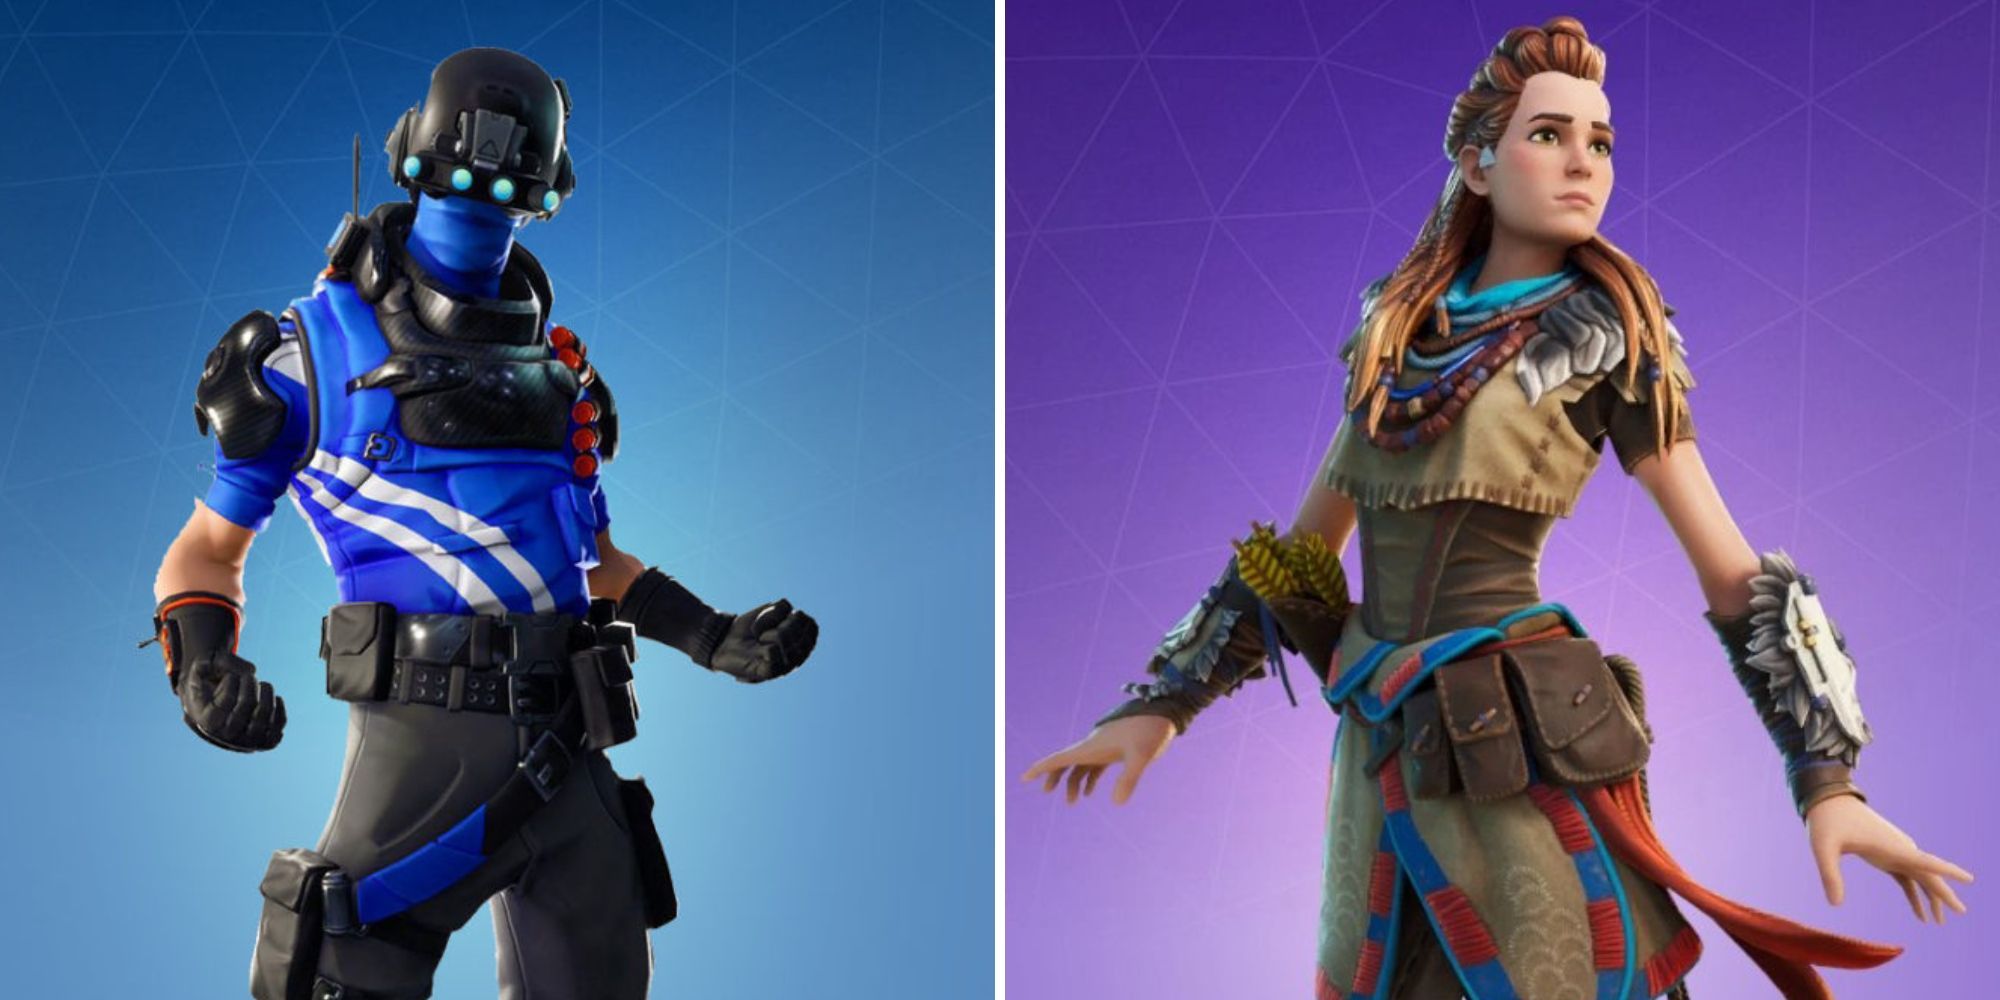 On the left is the Carbon Commando skin and on the left is the Aloy skin from Horizon Zero Dawn as displayed in Fortnite